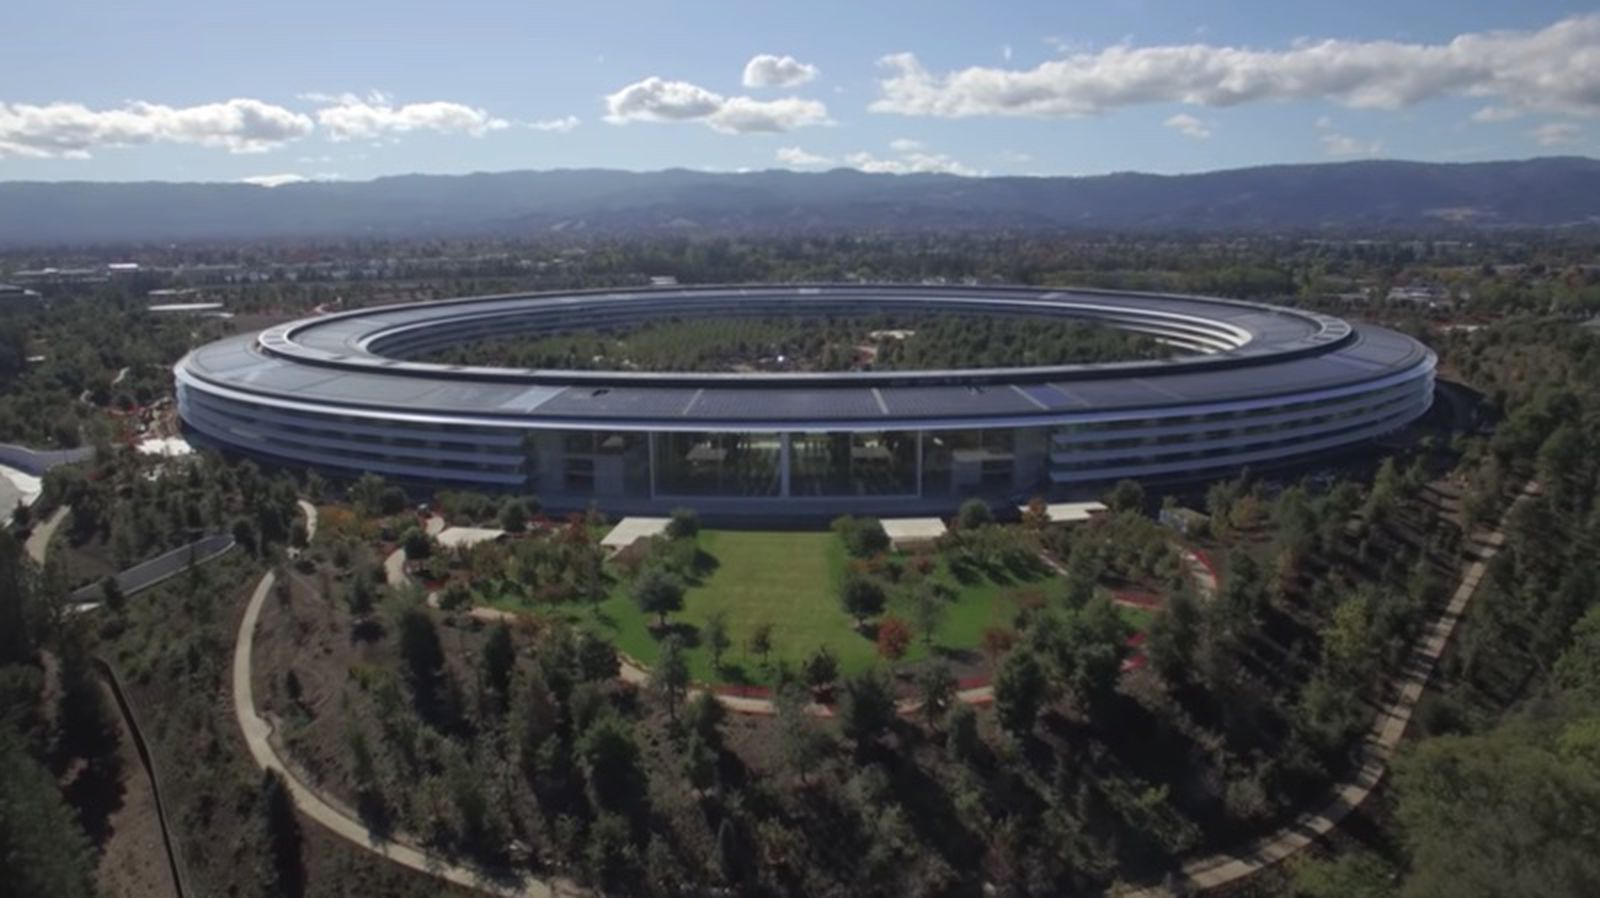 French News Channel Gets Rare Access Into Apple Park, 'One of the Most Secret Places on the Planet'